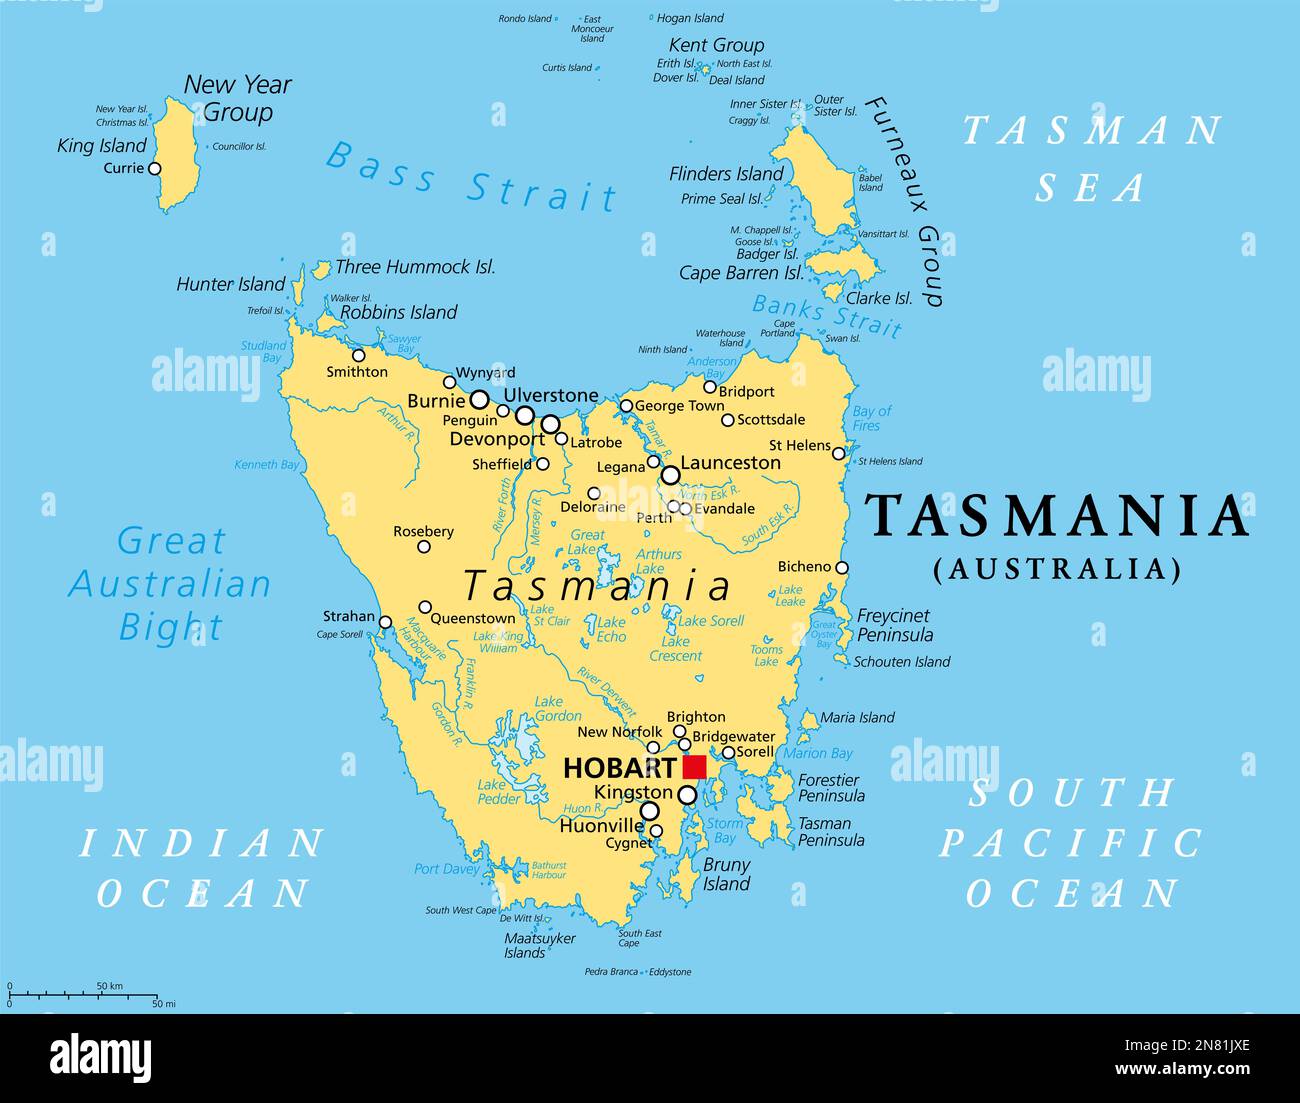 Tasmania, island state of Australia, political map. Located south of the Australian mainland, separated from it by Bass Strait. Stock Photo